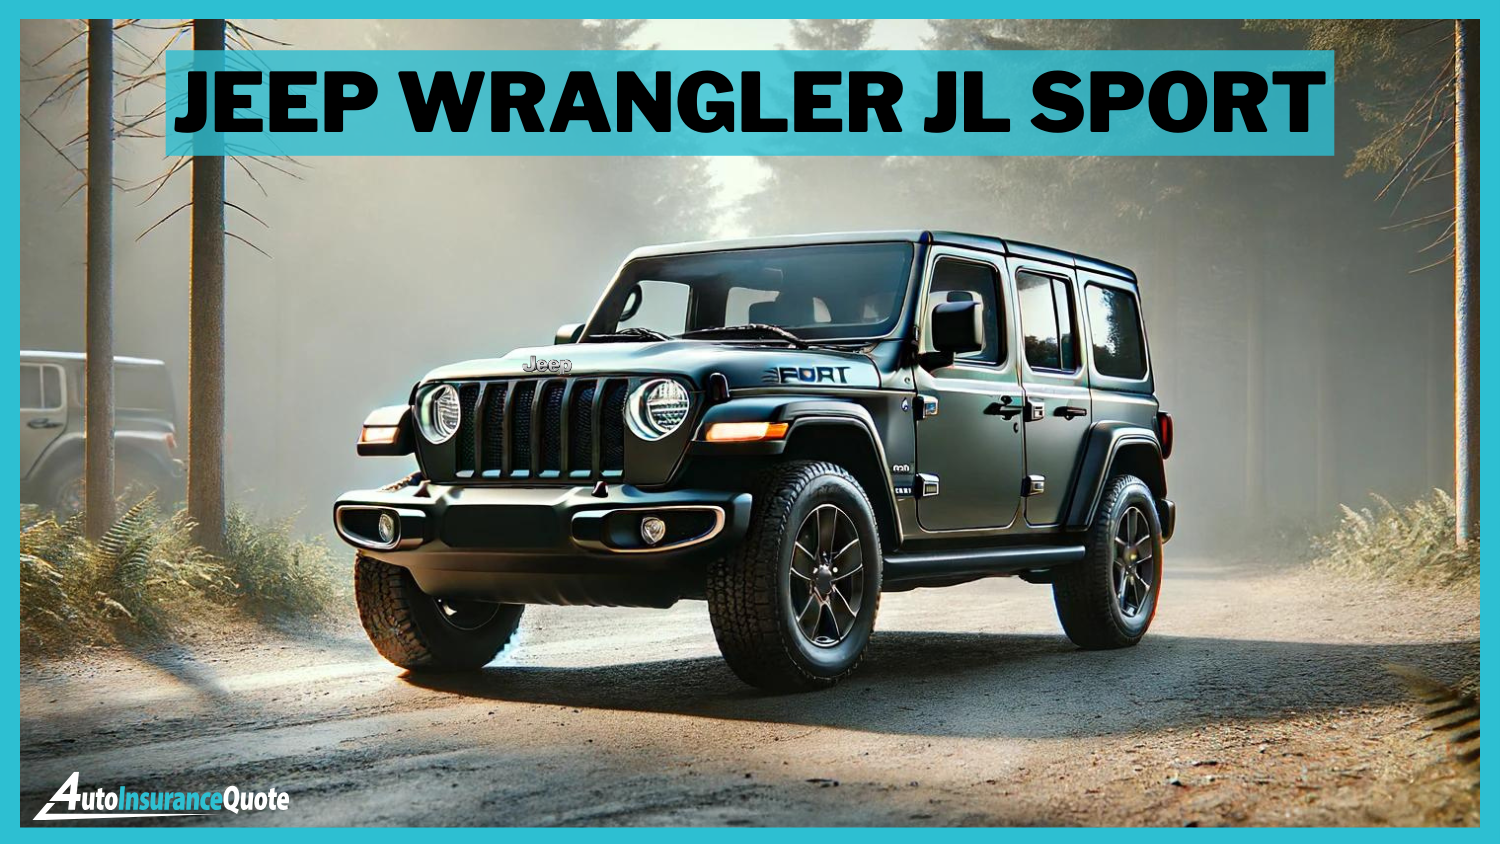 Jeep Wrangler JL Sport: Cheapest Cars for 17-Year-Olds to Insure